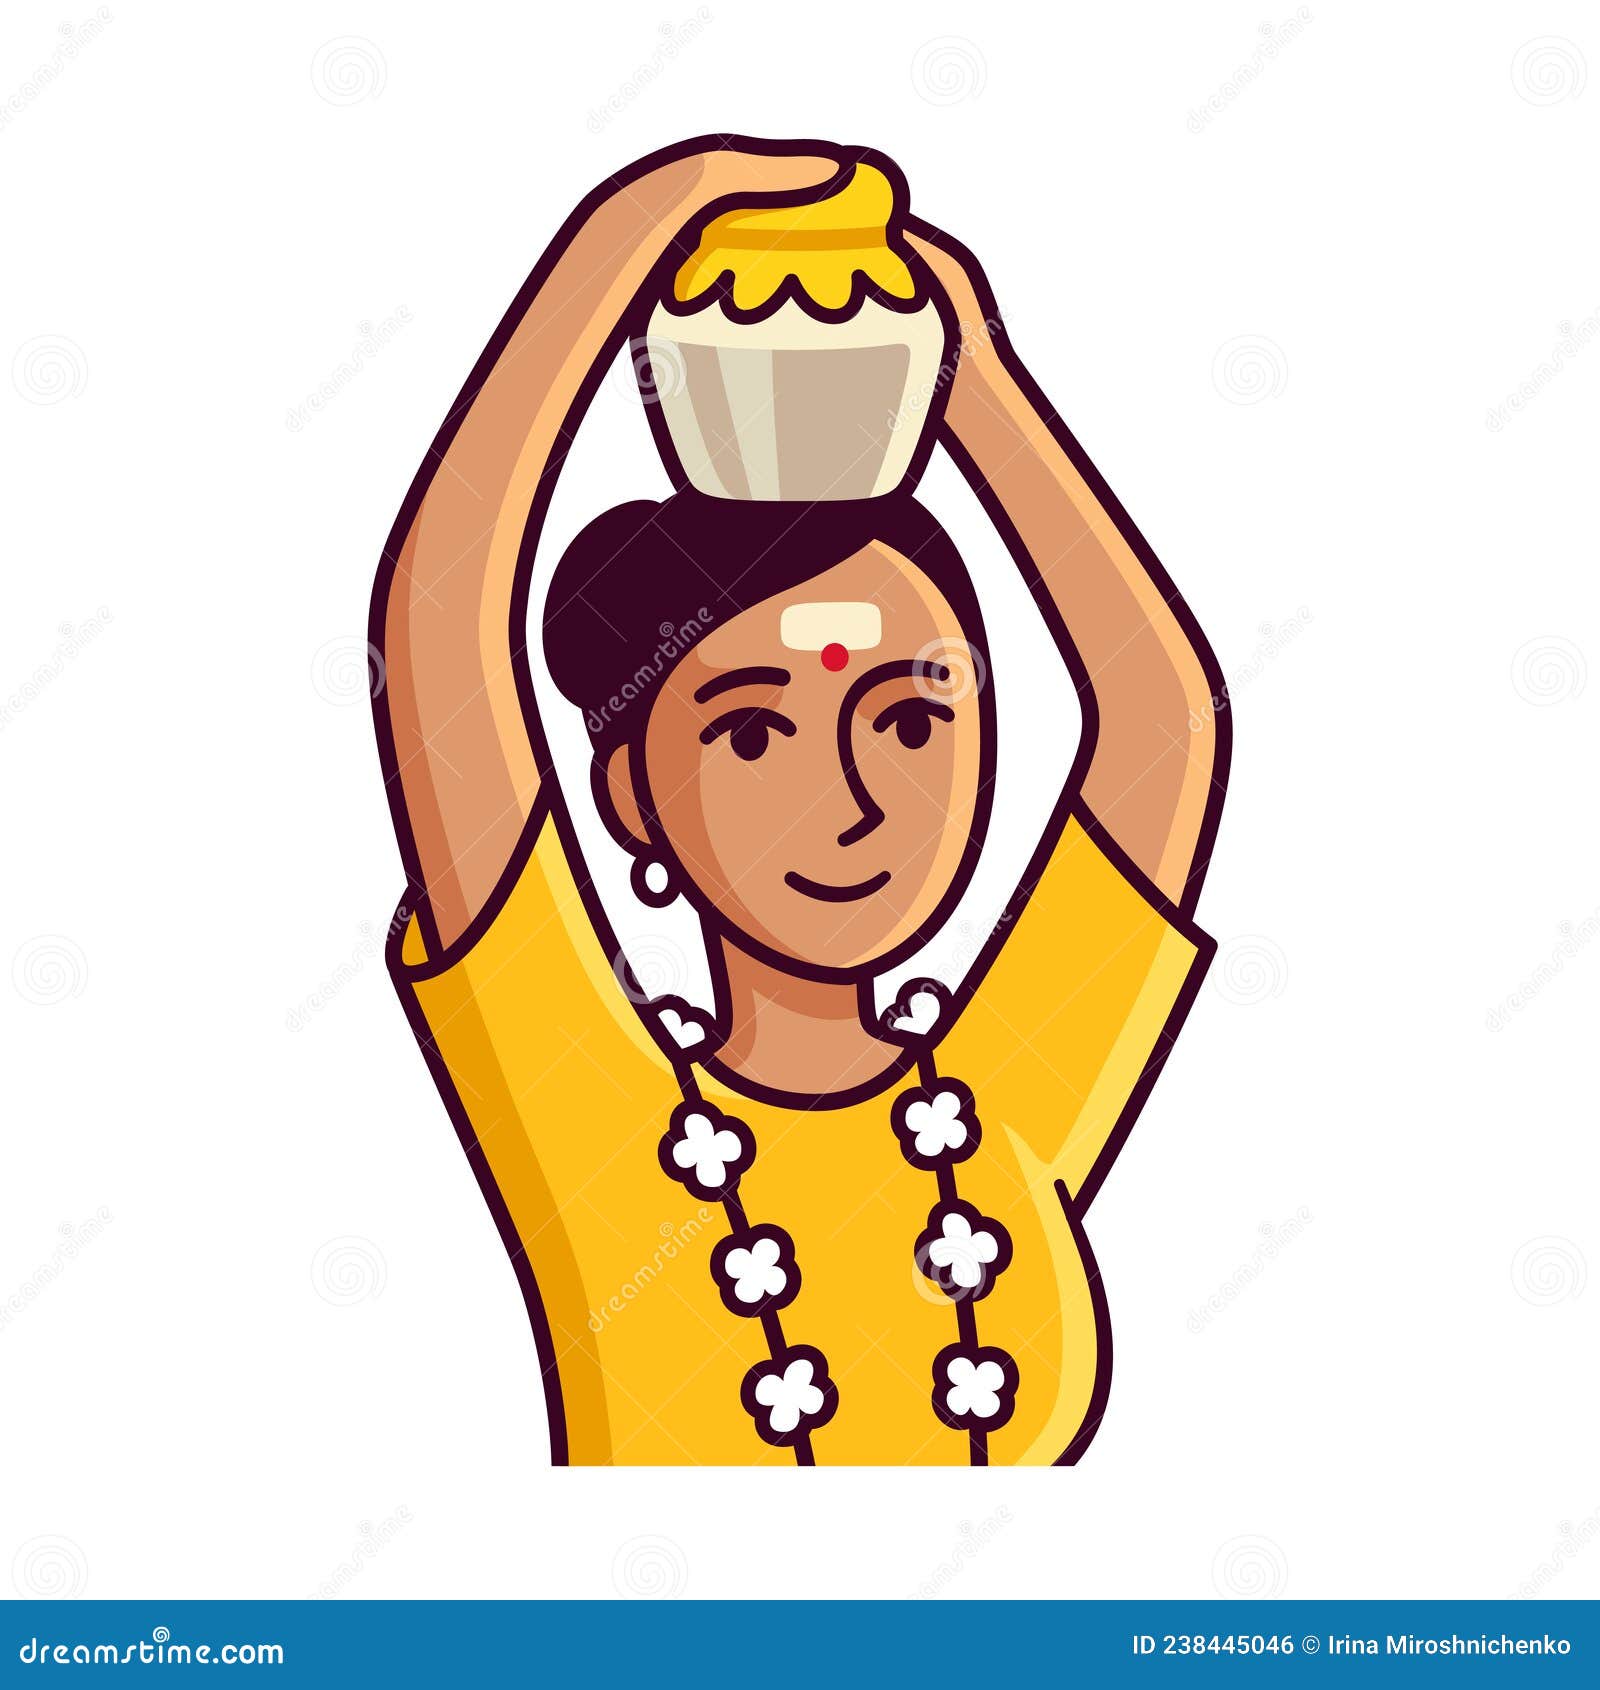 Thaipusam Tamil Cartoon Woman Stock Vector - Illustration of singapore,  carrying: 238445046